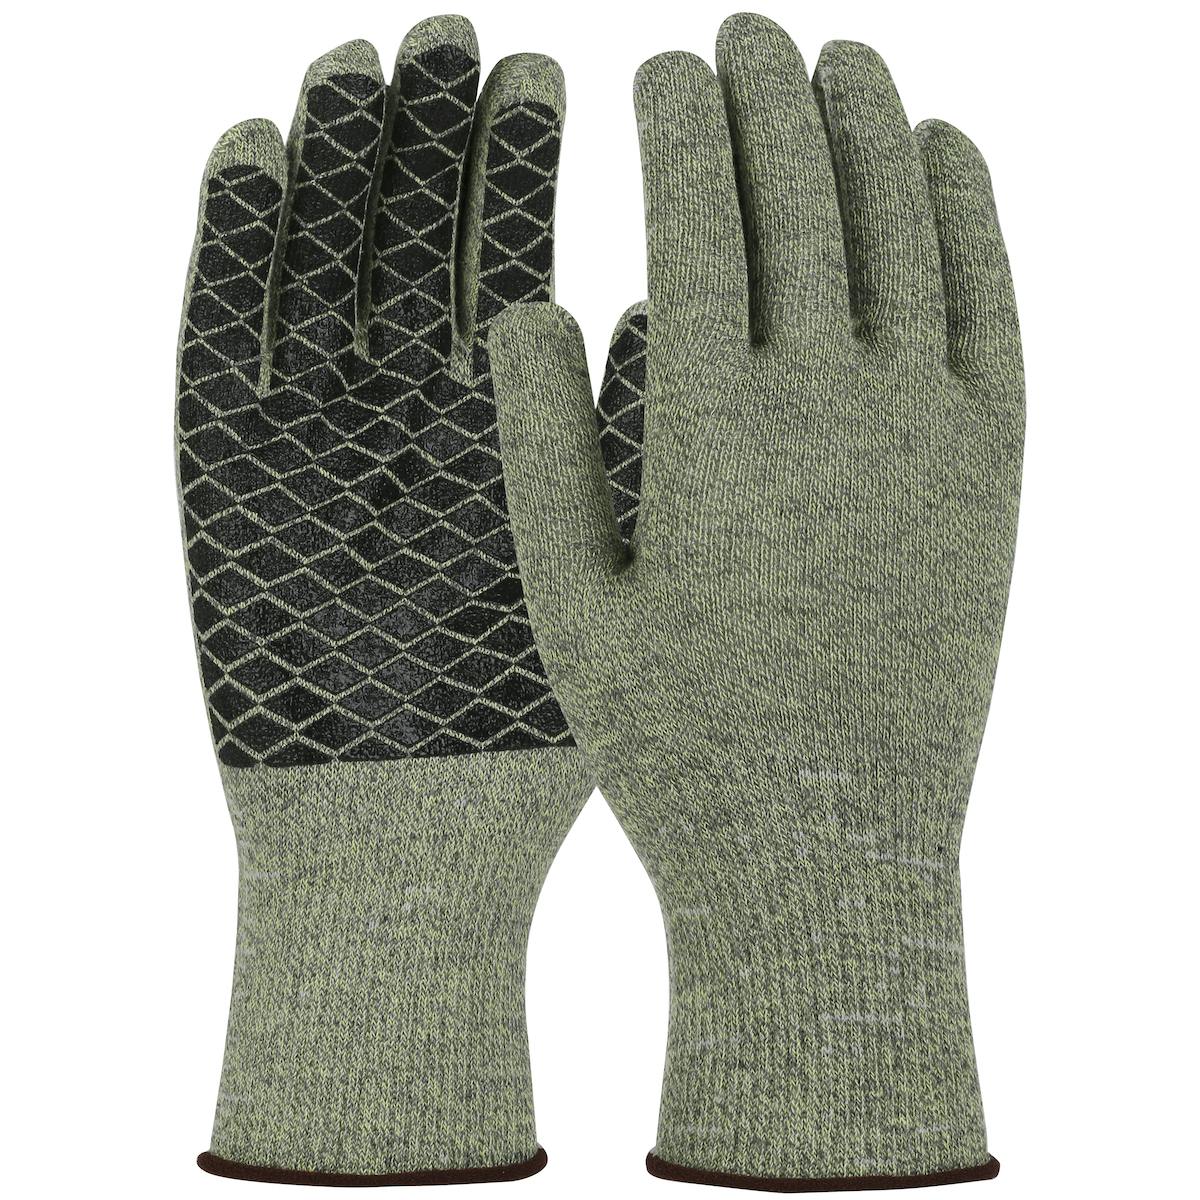 Kut Gard® Seamless Knit ATA® / Elastane Blended Glove with PVC Patterned Grip on Palm (M530-PCX1)